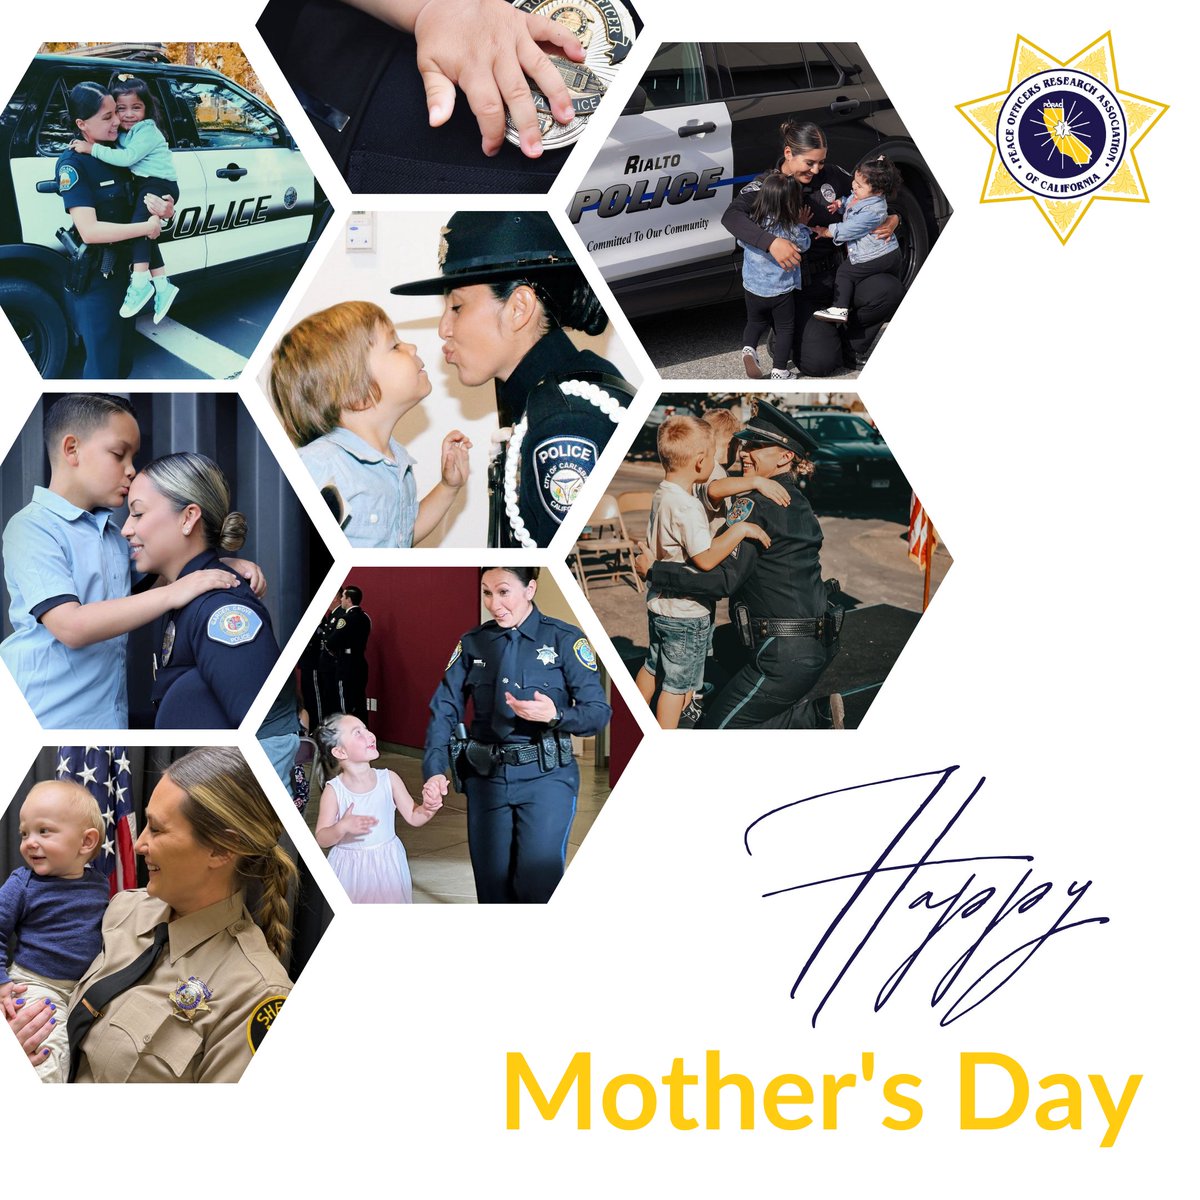 Happy Mother's Day 💛 Thank you to those amazing moms out there proudly serving their communities. @RialtoPolice @CarlsbadPolice @GardenaPD @GaltPolice @GardenaPD @SantaClaraPD